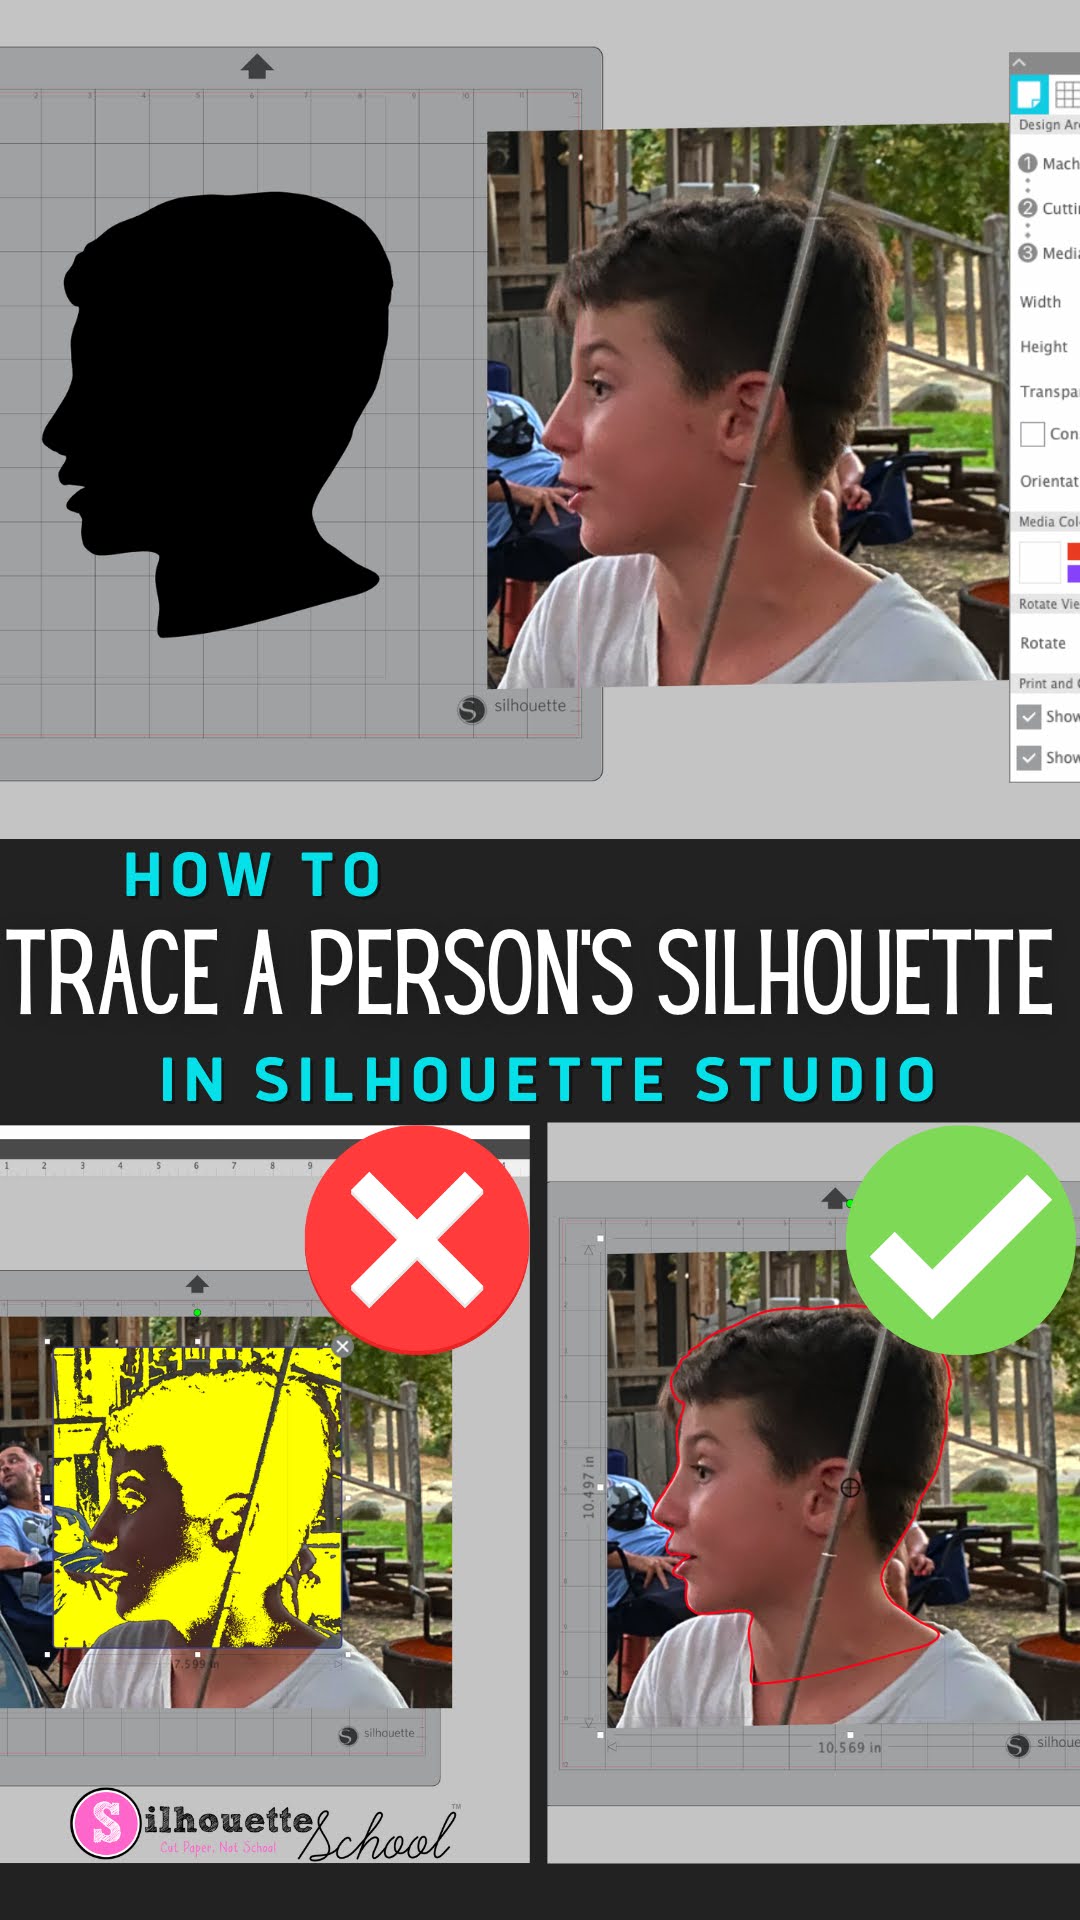 How to Trace a Silhouette of a Person in Silhouette Studio